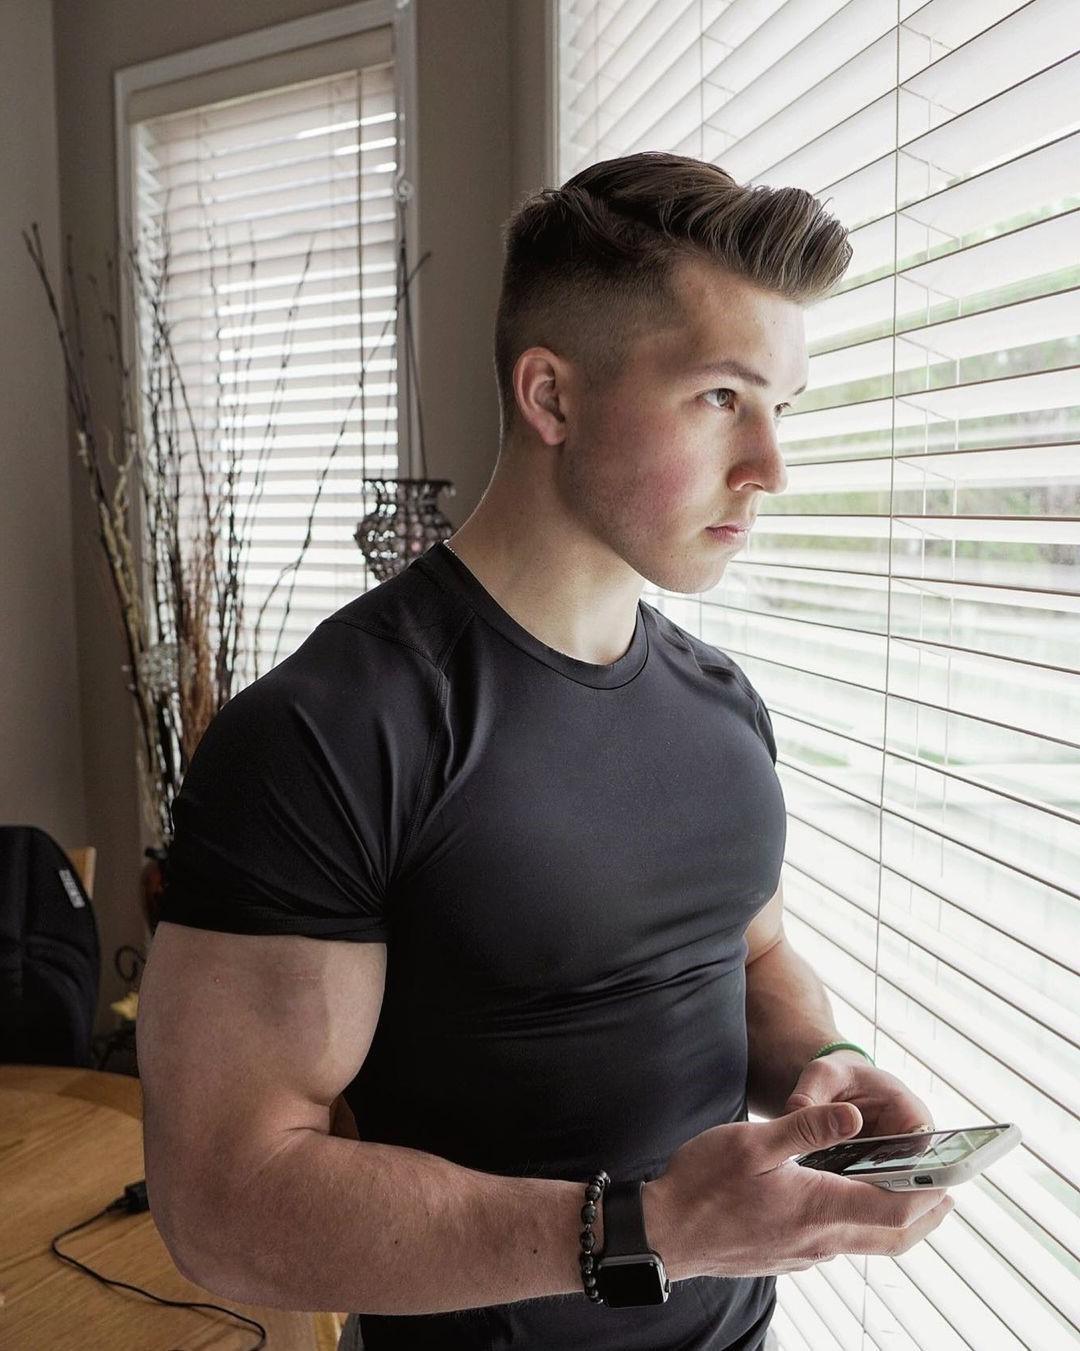 young-fit-muscle-shirt-hunk-big-biceps-bro-texting-voayeur-perv-looking-through-window